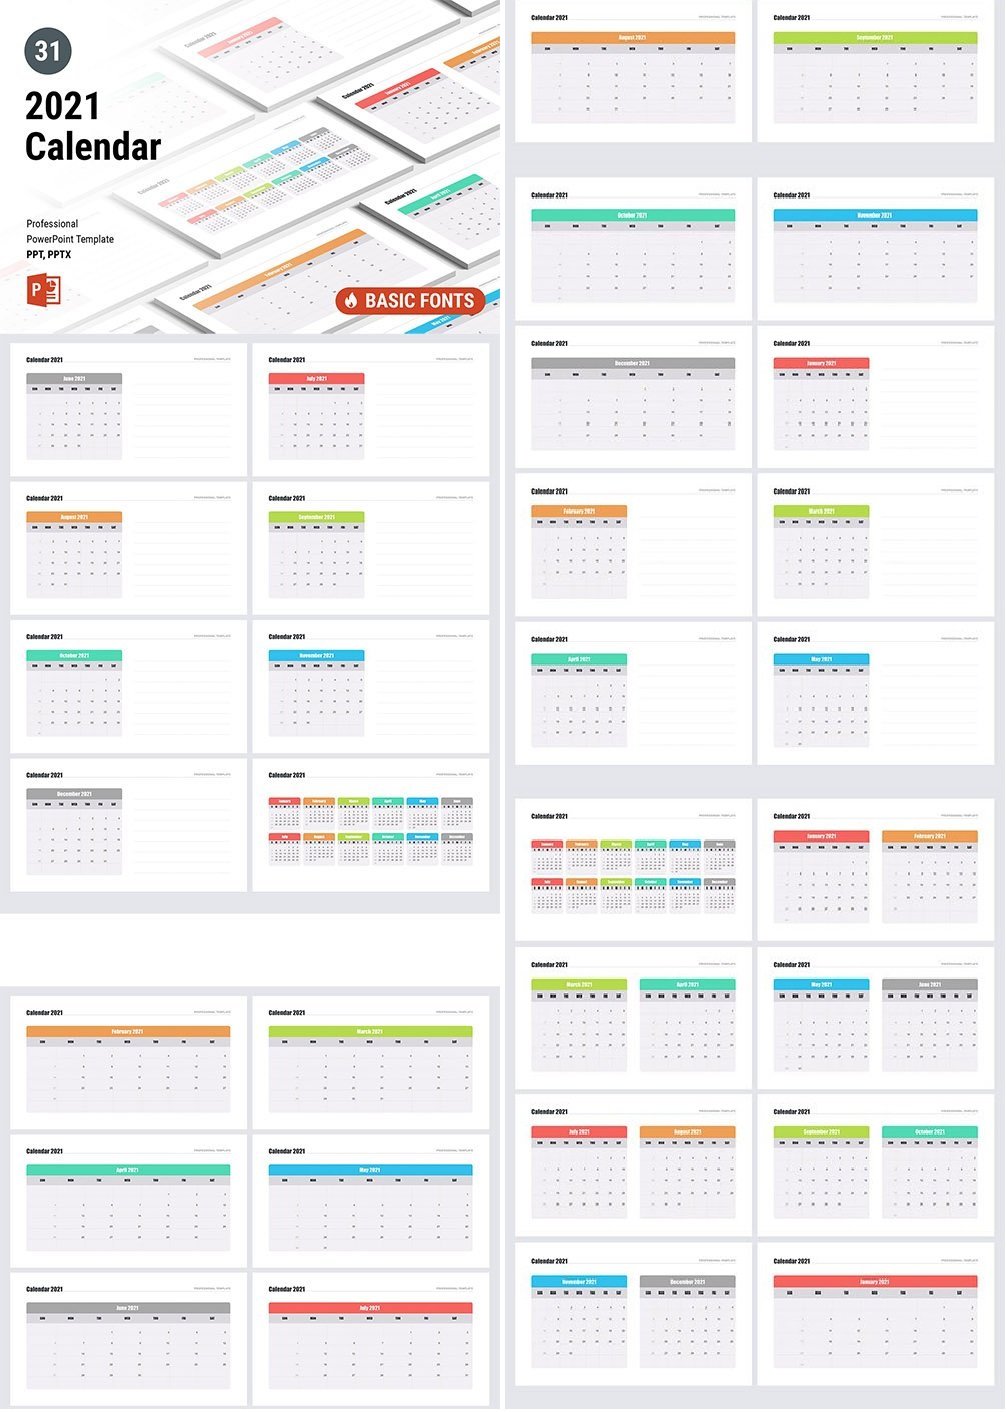 Calendar 2021 for PowerPoint and Keynote - SoftArchive